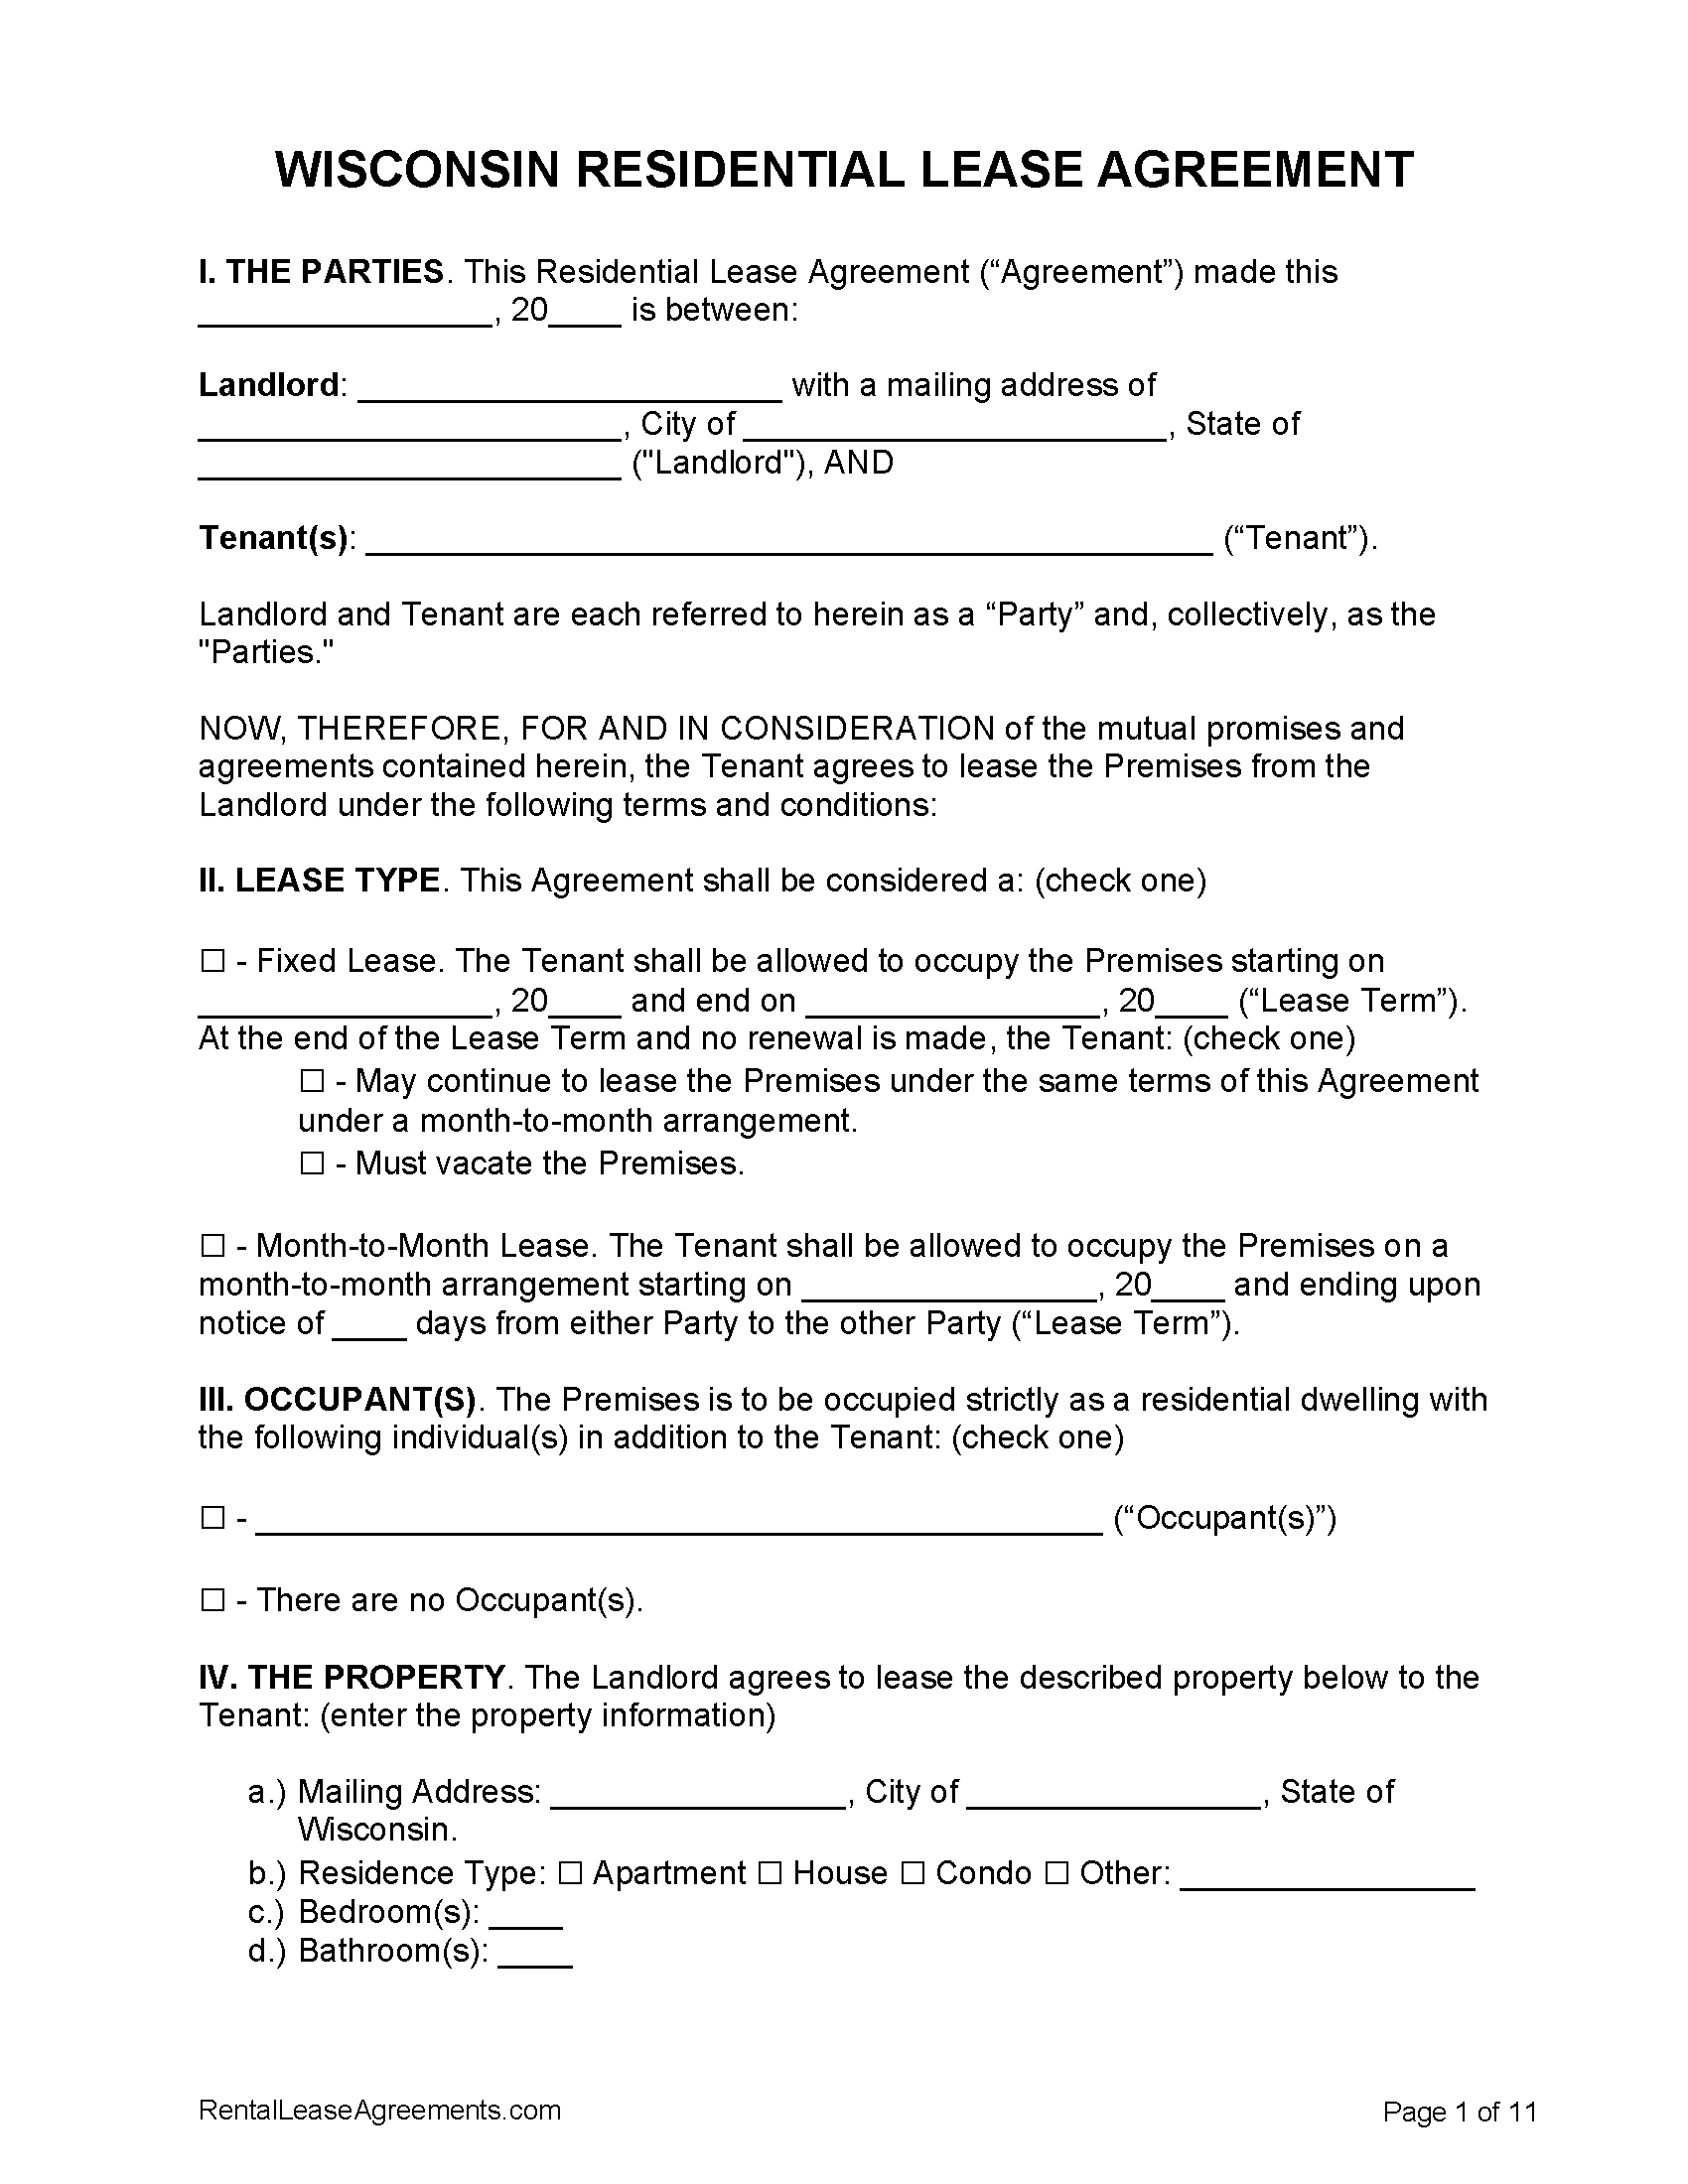 wisconsin-residential-lease-agreement-pdf-ms-word-free-17-simple-rental-agreement-templates-in